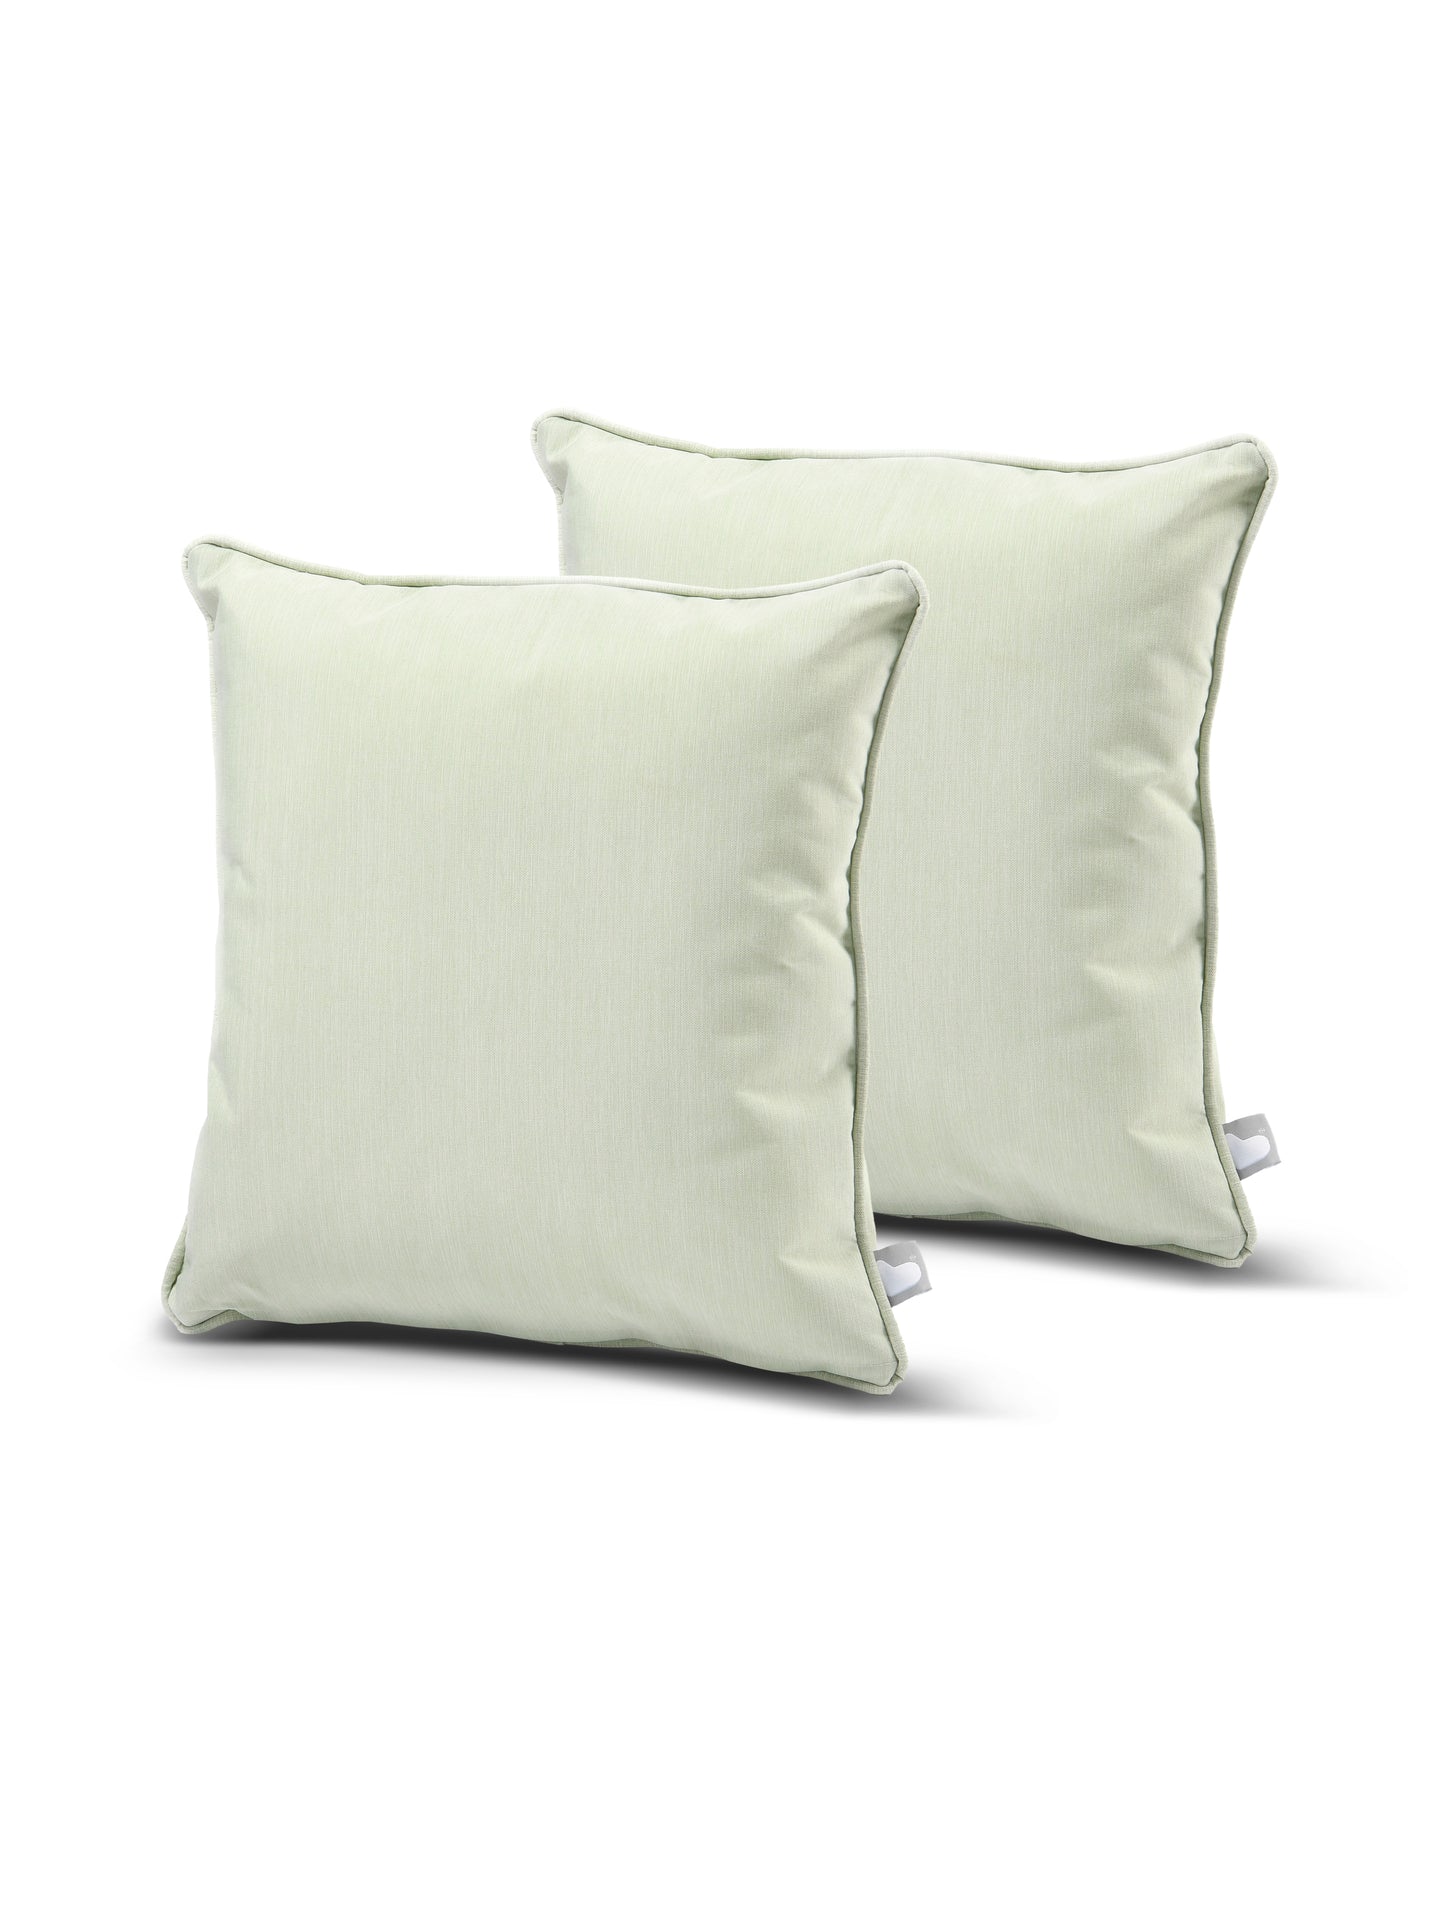 Two light green square pillows with a slightly shiny texture are placed against a white background. Each pillow has a small white tag on one of its sides. Made from splash-proof fabric, this B Cushion Twin Pack Pastel Collection by Brisks appears plush and comfortable for use on furniture.